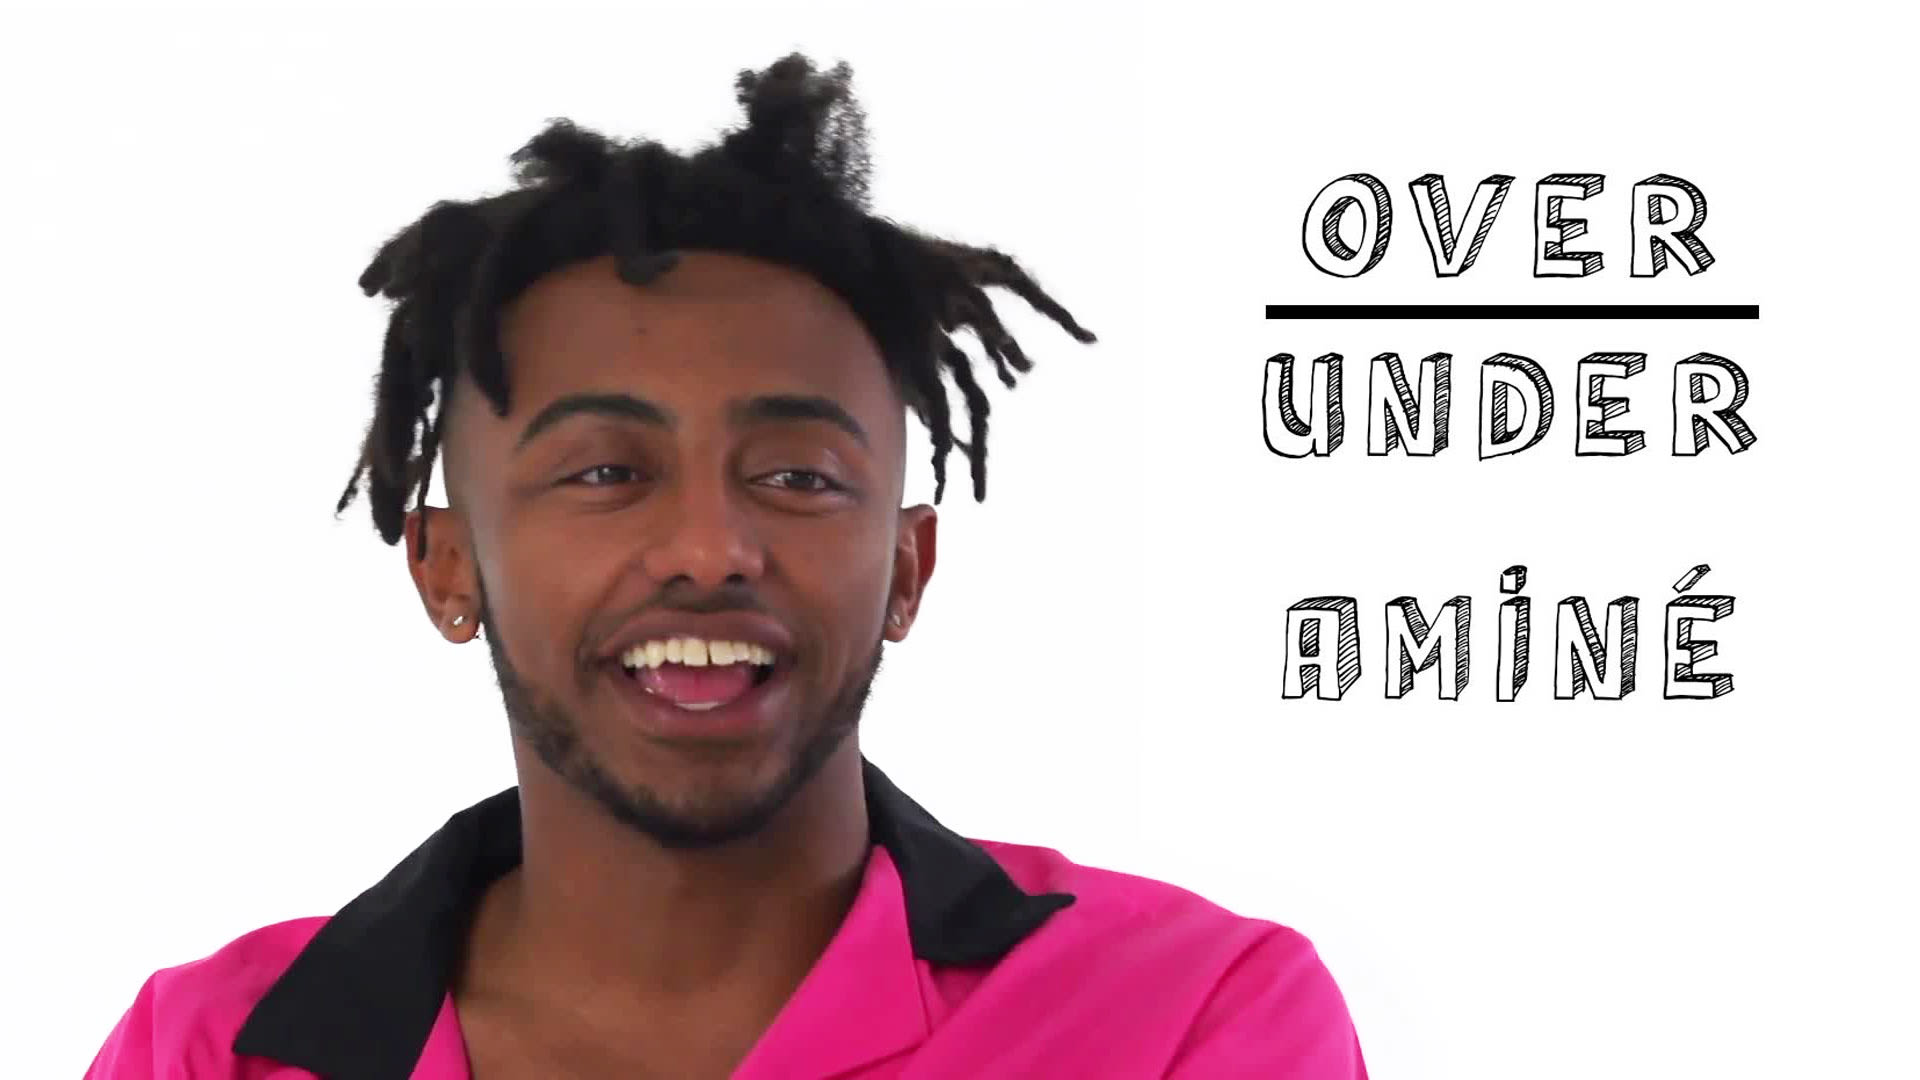 Naked Hairy Girls Nude Beach - Watch AminÃ© Rates Boy Bands, Nude Bicycling, and Wardrobe Malfunctions |  Over/Under | Pitchfork